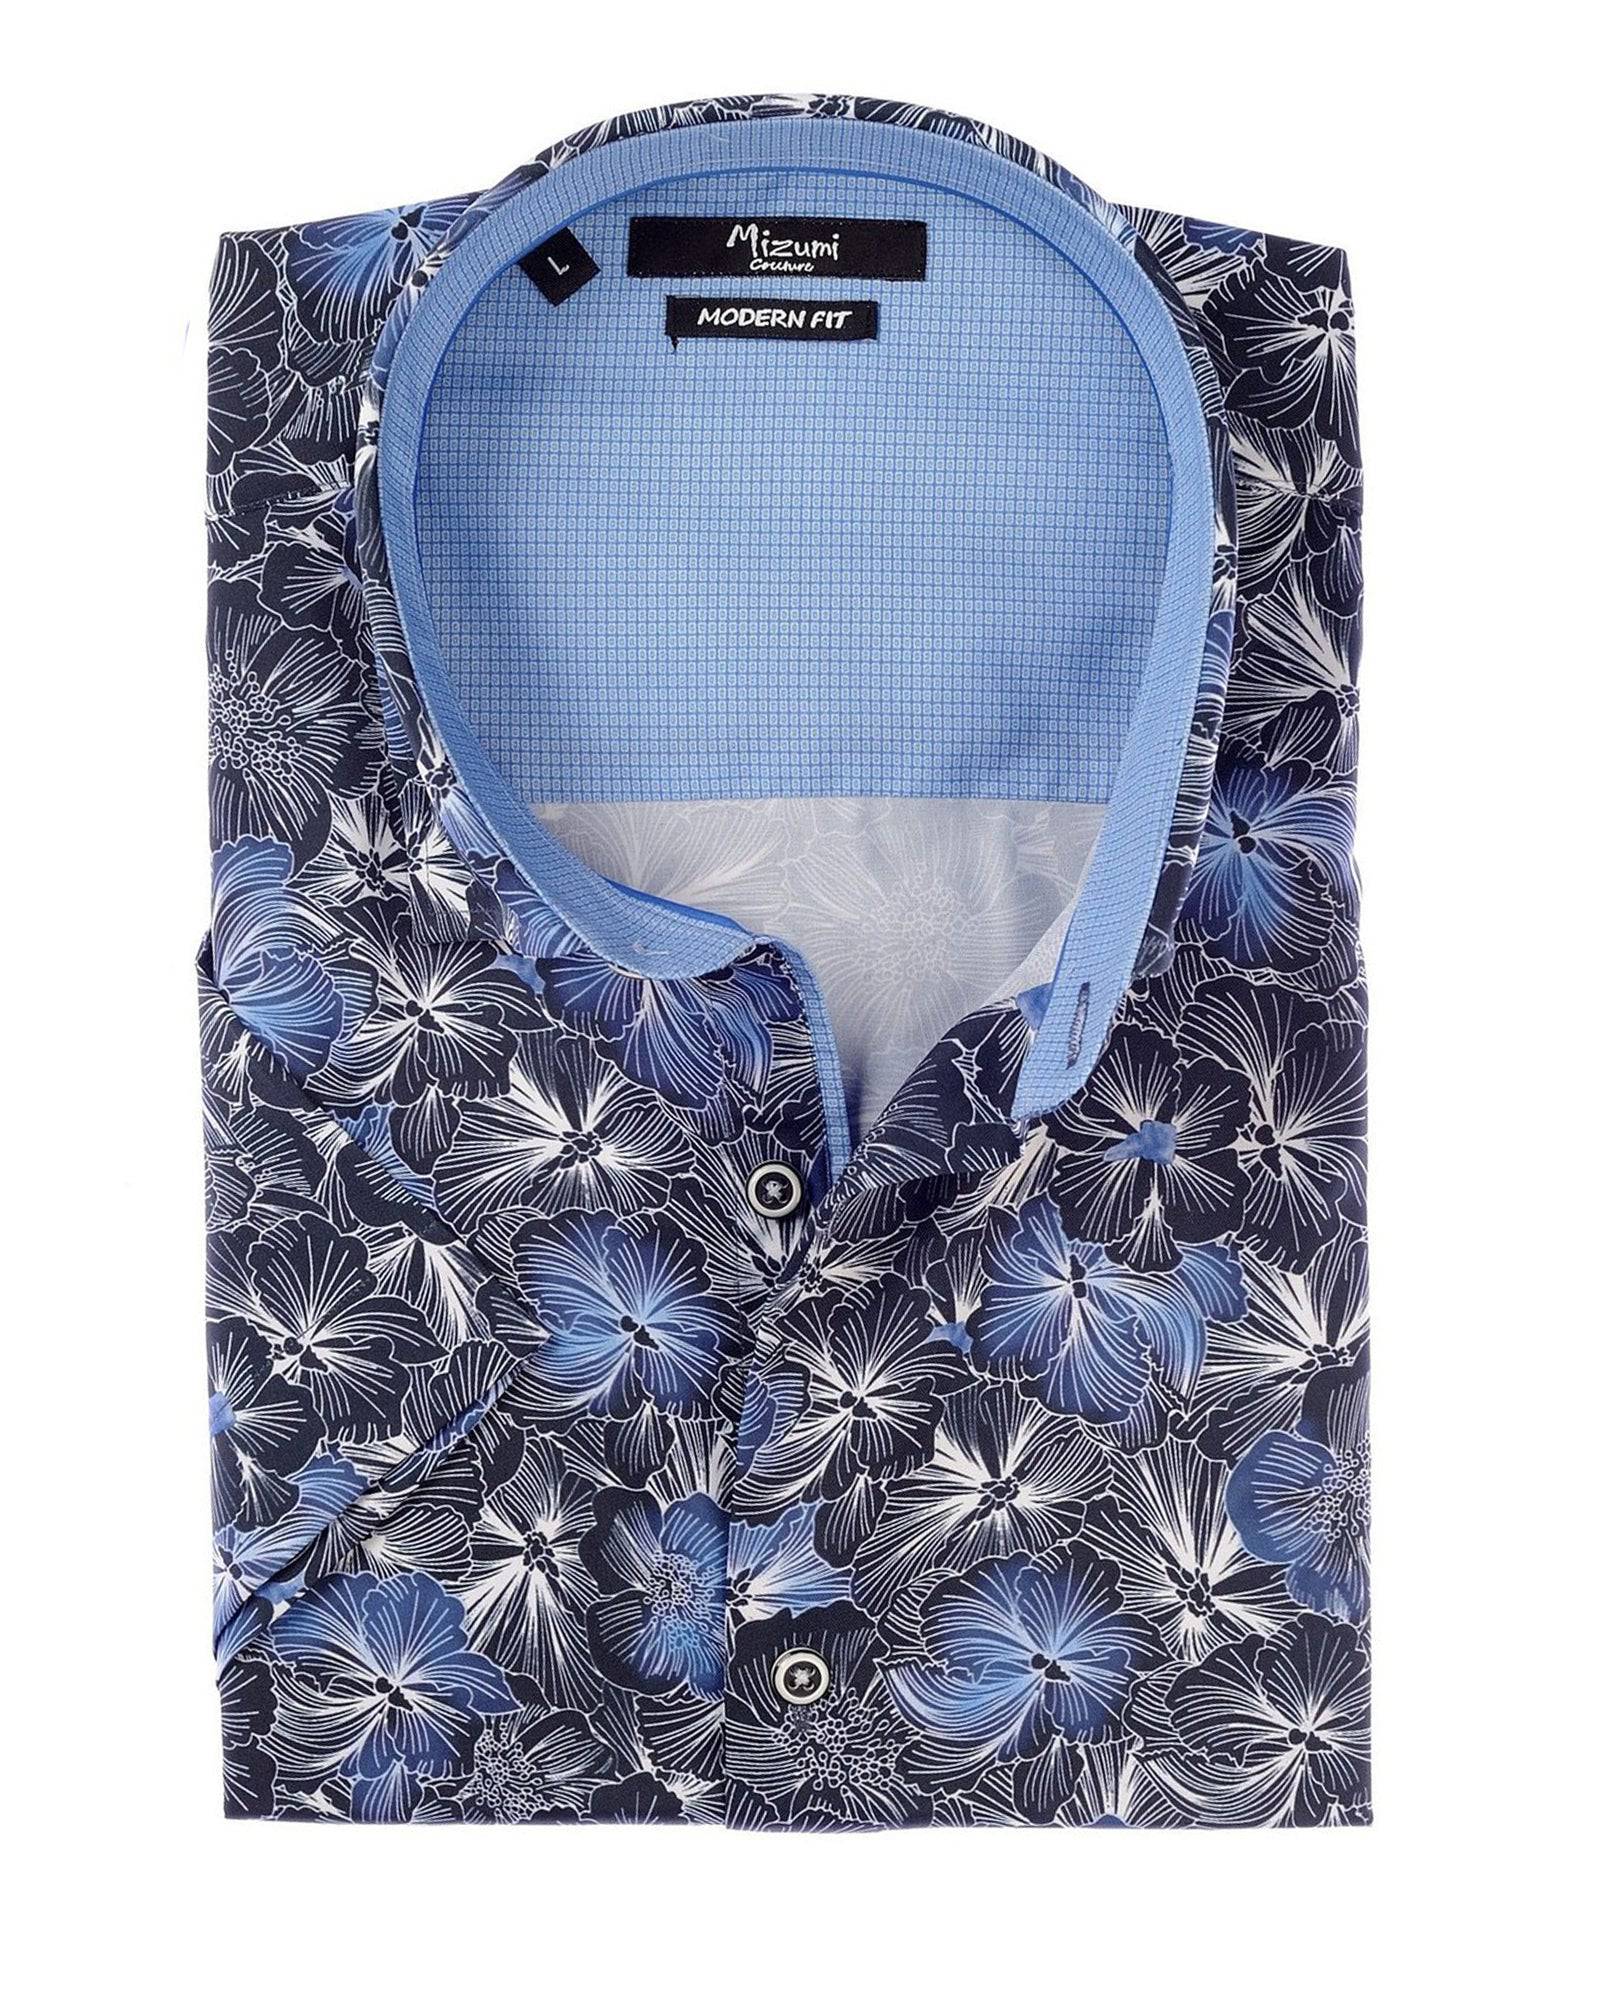 Mizumi Print Short Sleeve Hidden Button Down in Navy with Blue Floral - Rainwater's Men's Clothing and Tuxedo Rental